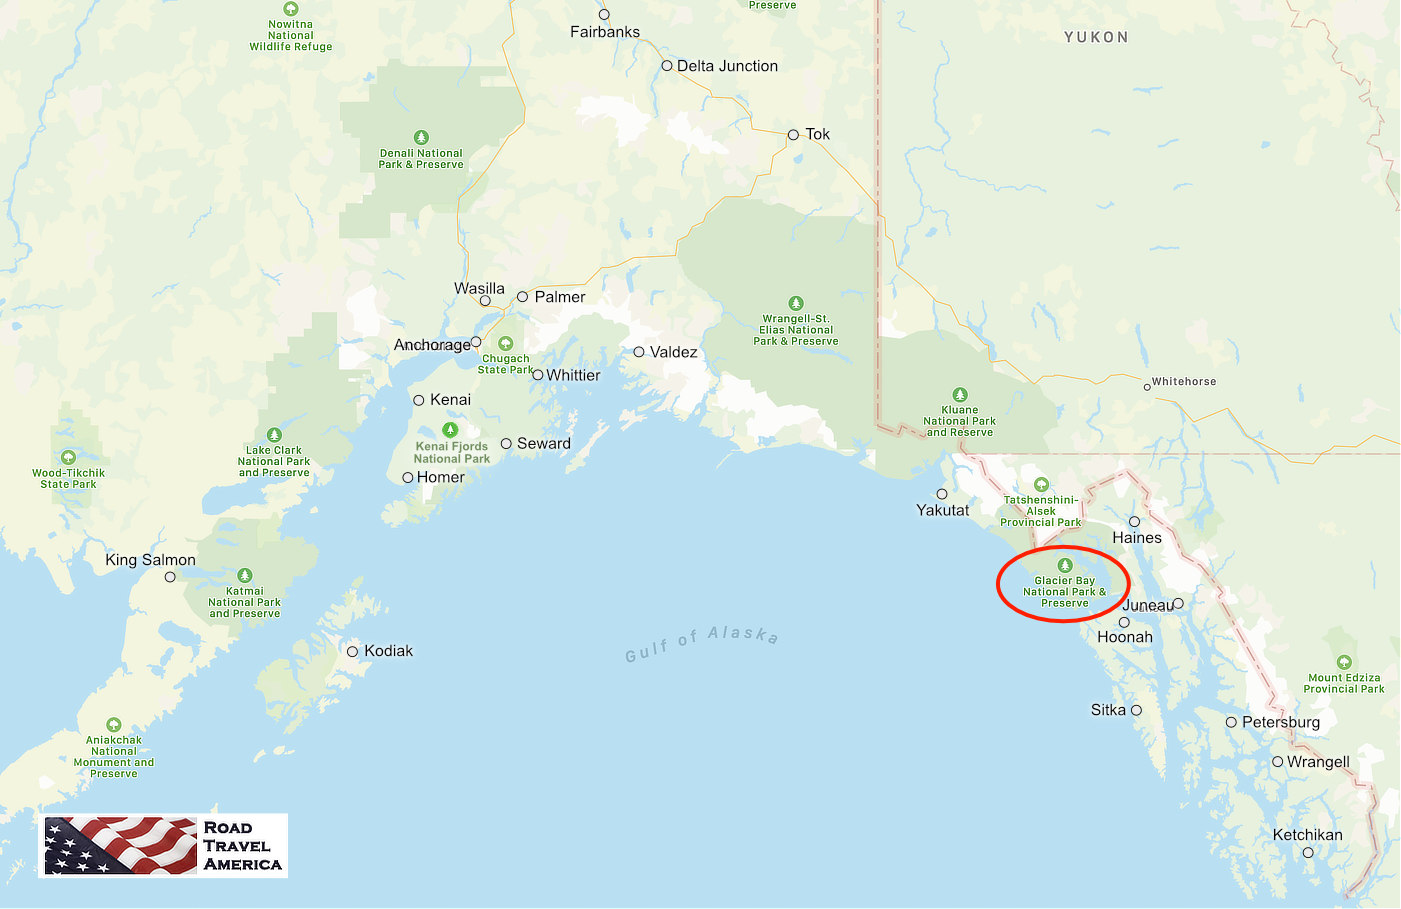 Map showing the location of Glacier Bay National Park & Preserve relative to other Alaska cities, parks and preserves